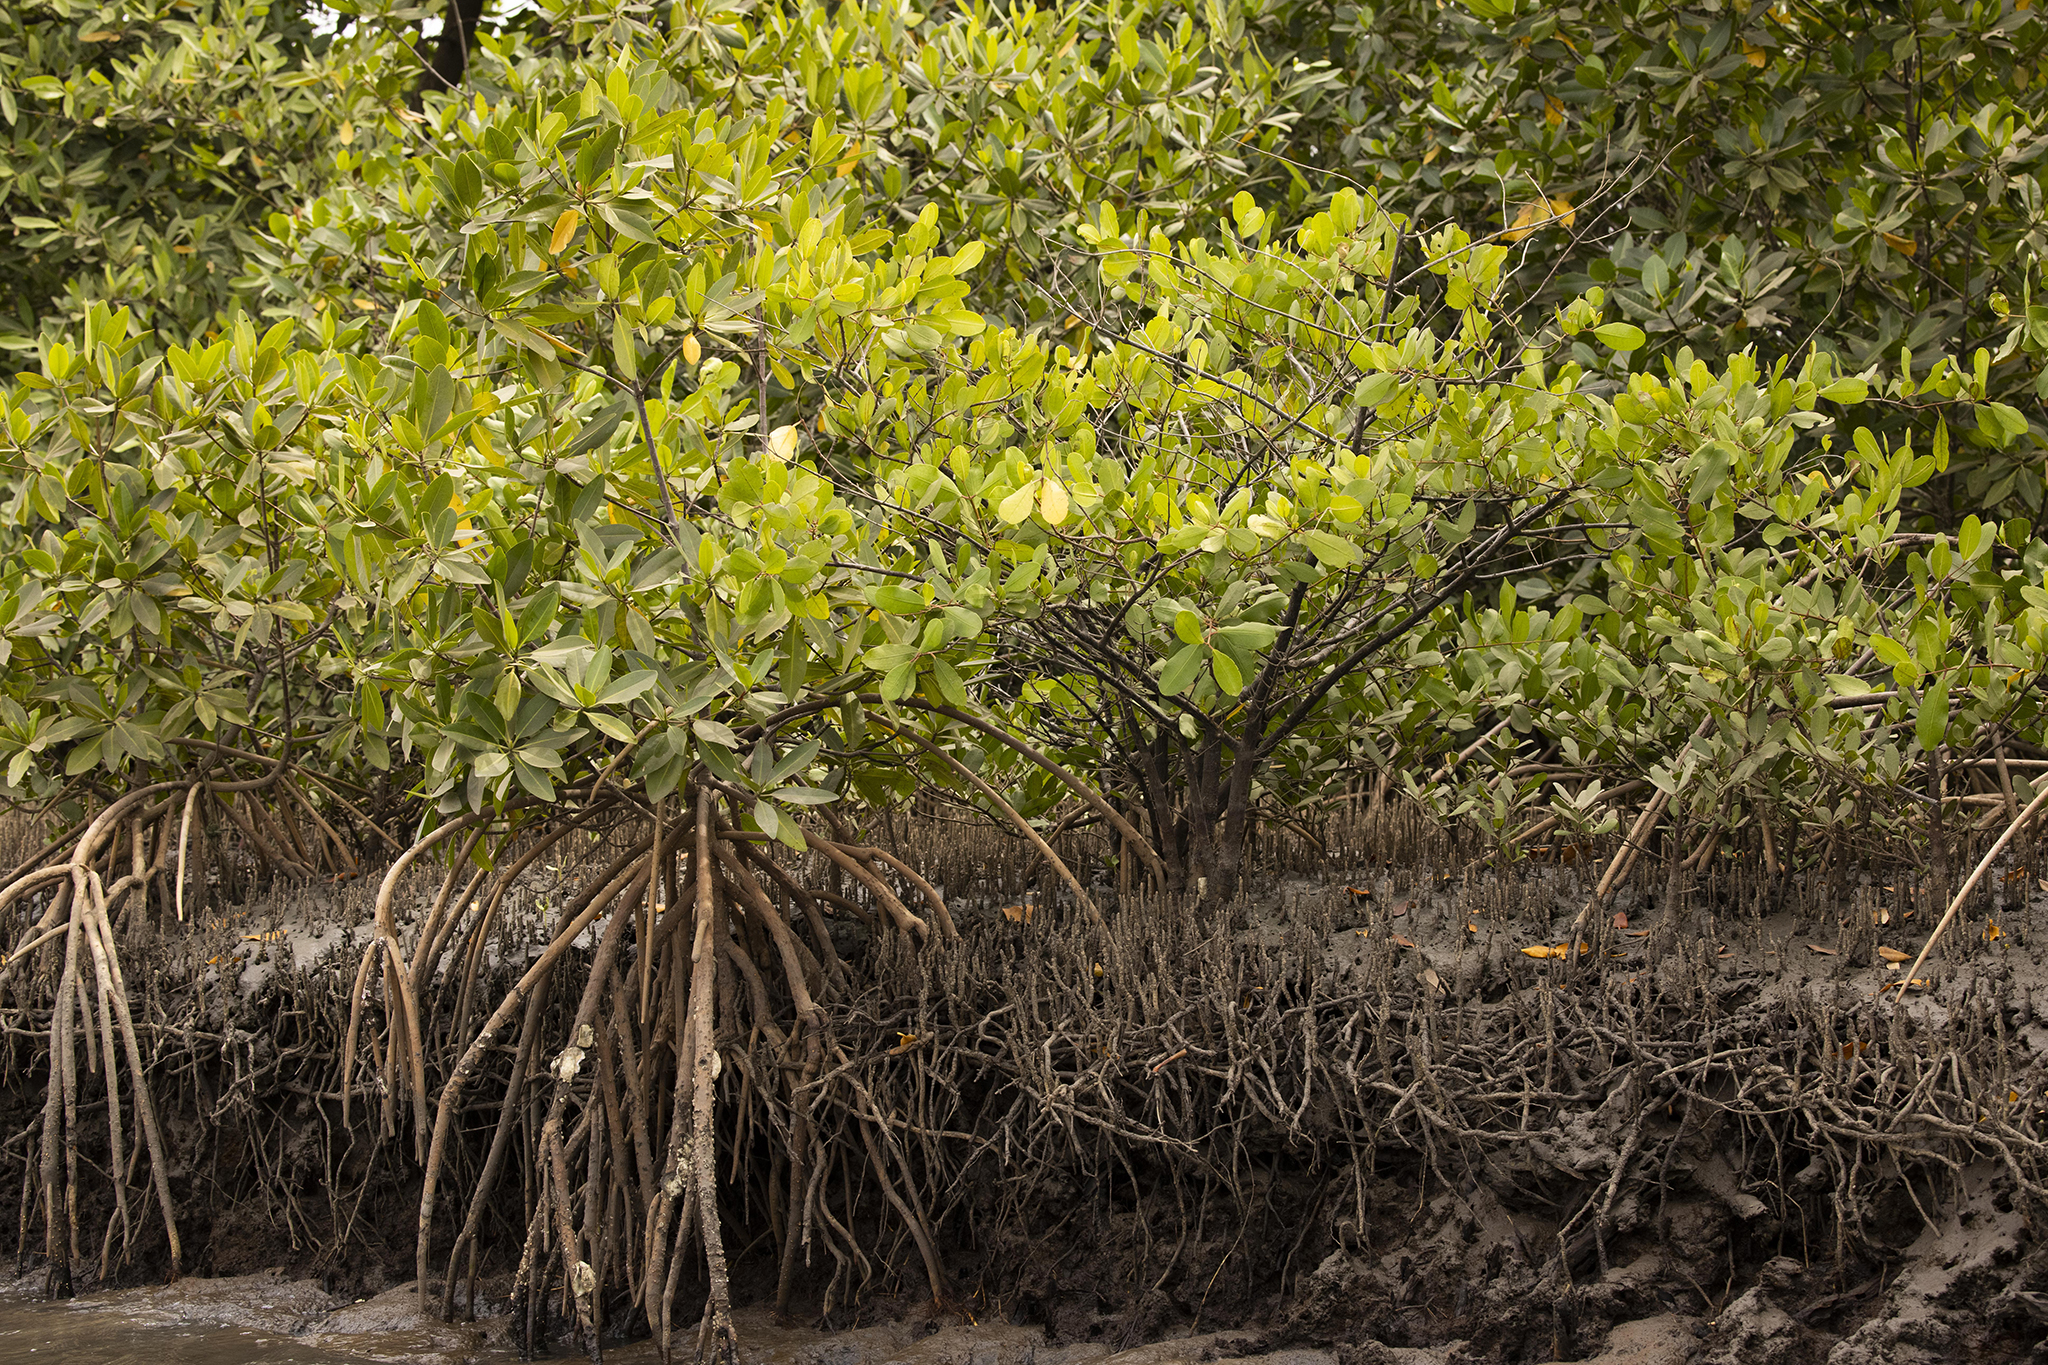 Mangroves’ complex root systems protect coastal areas from storms and erosion, provide habitats for fish and shellfish that are important protein sources for local people, and sequester huge amounts of carbon that can fight climate change. © Nicolas Van Ingen